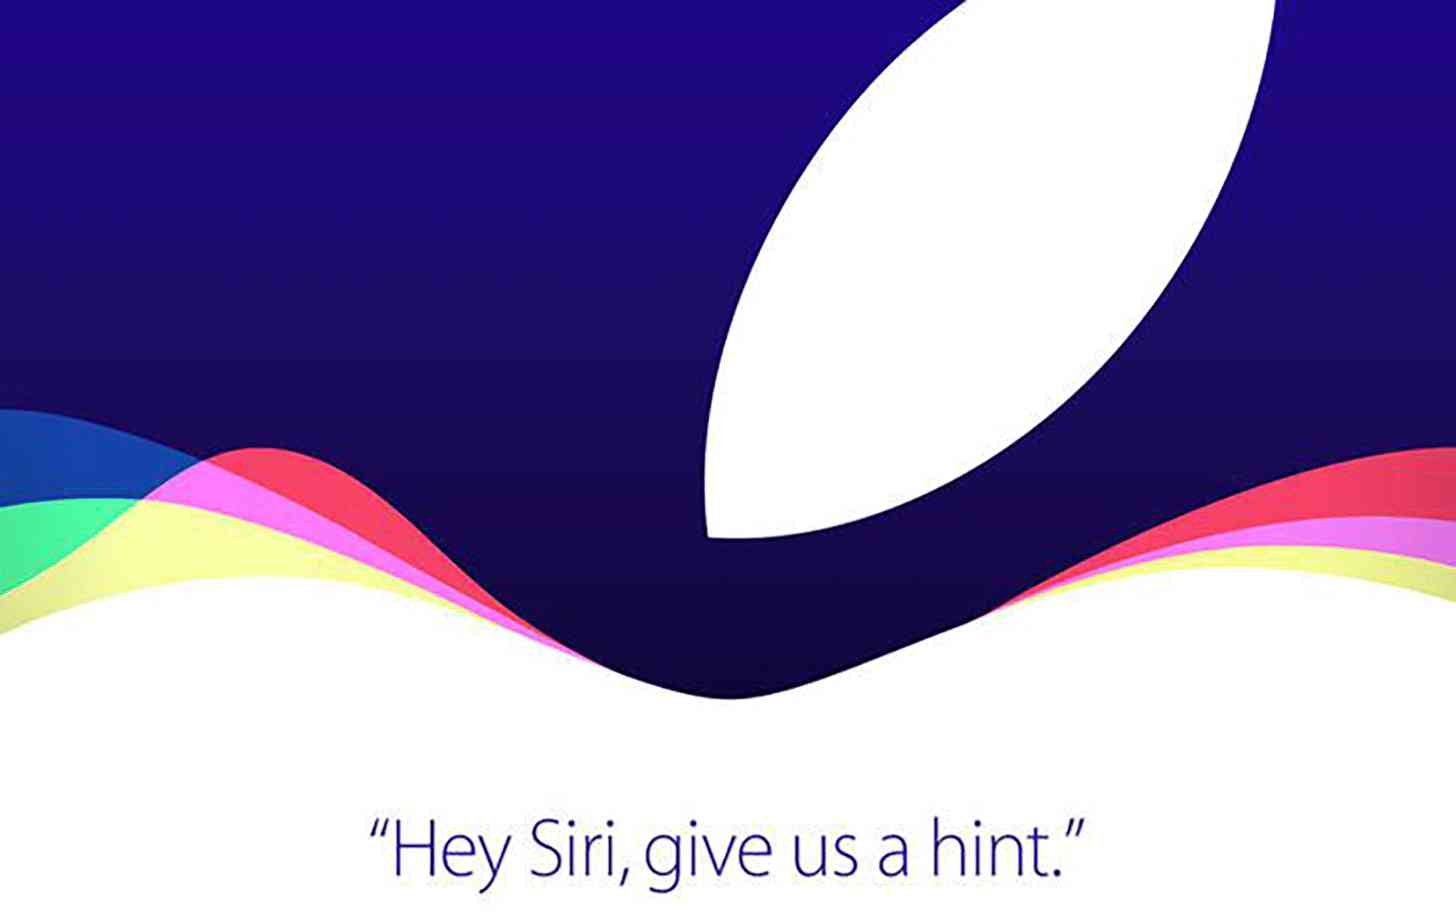 Apple September 9 iPhone 6s event invite large